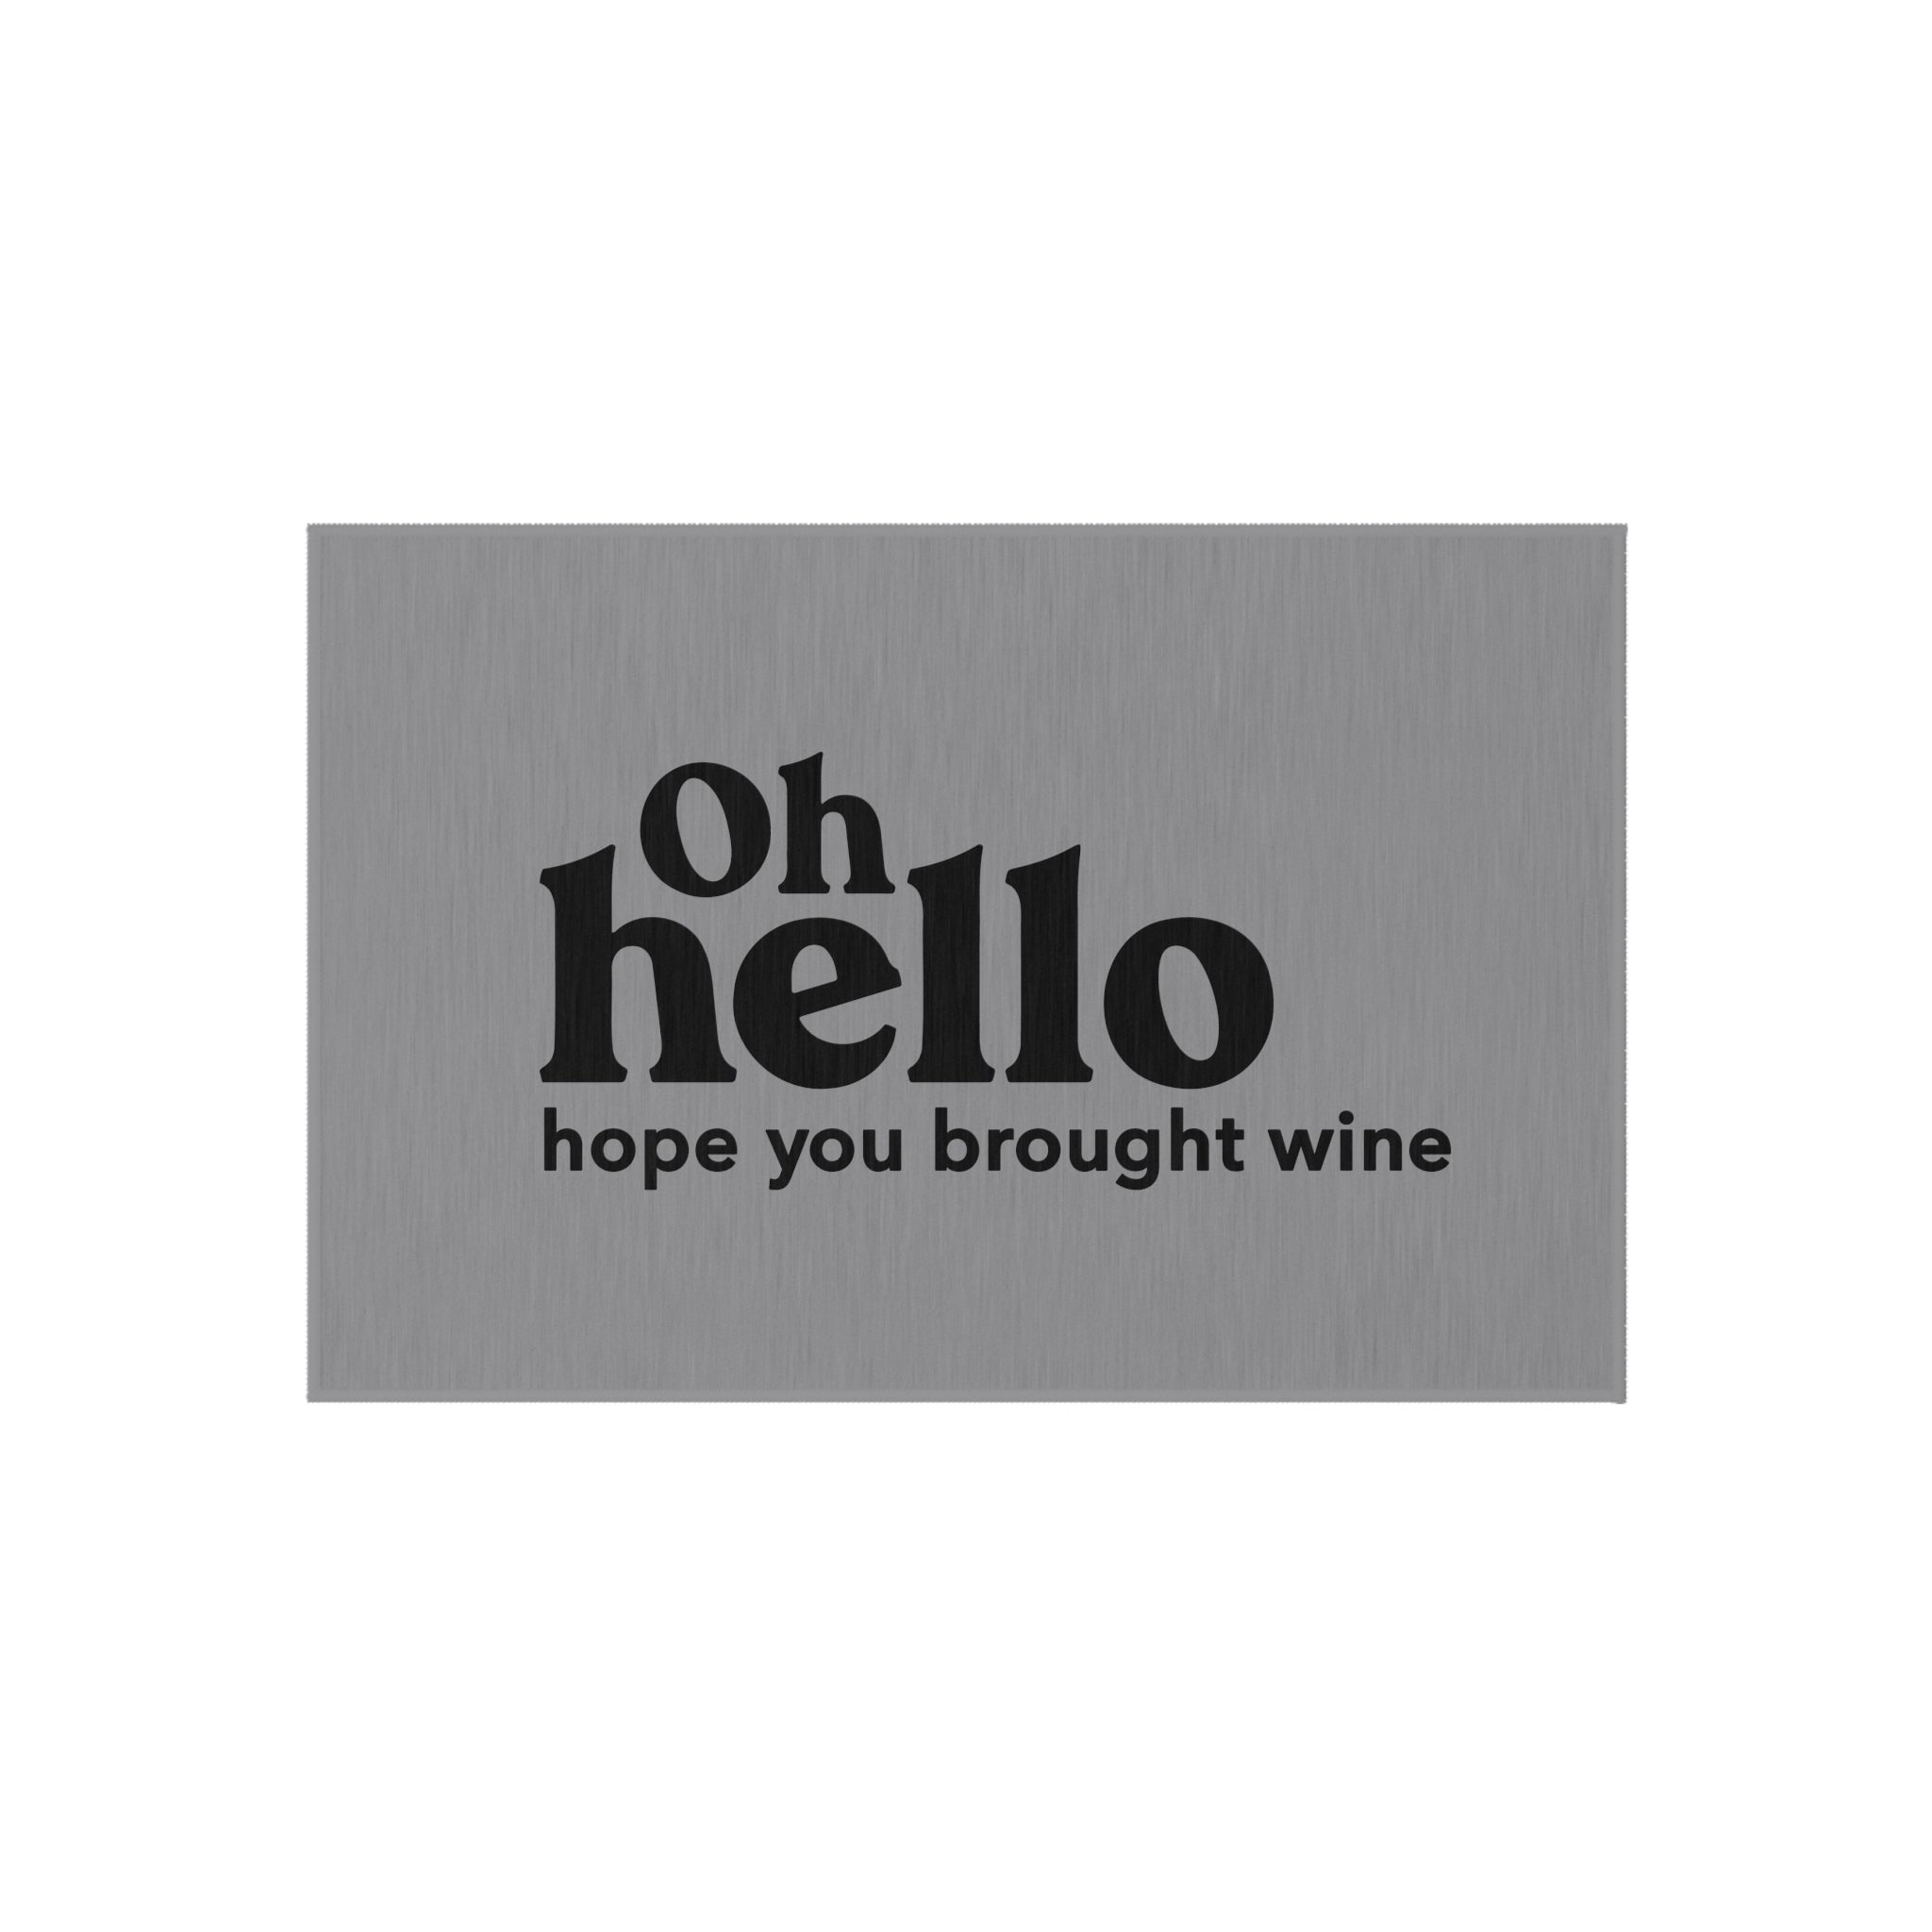 Oh Hello, Hope You Brought Wine Funny Sarcastic Welcome Mat (Grey), Outdoor Mat for Front Door, Housewarming Gift, Dornier Rug,